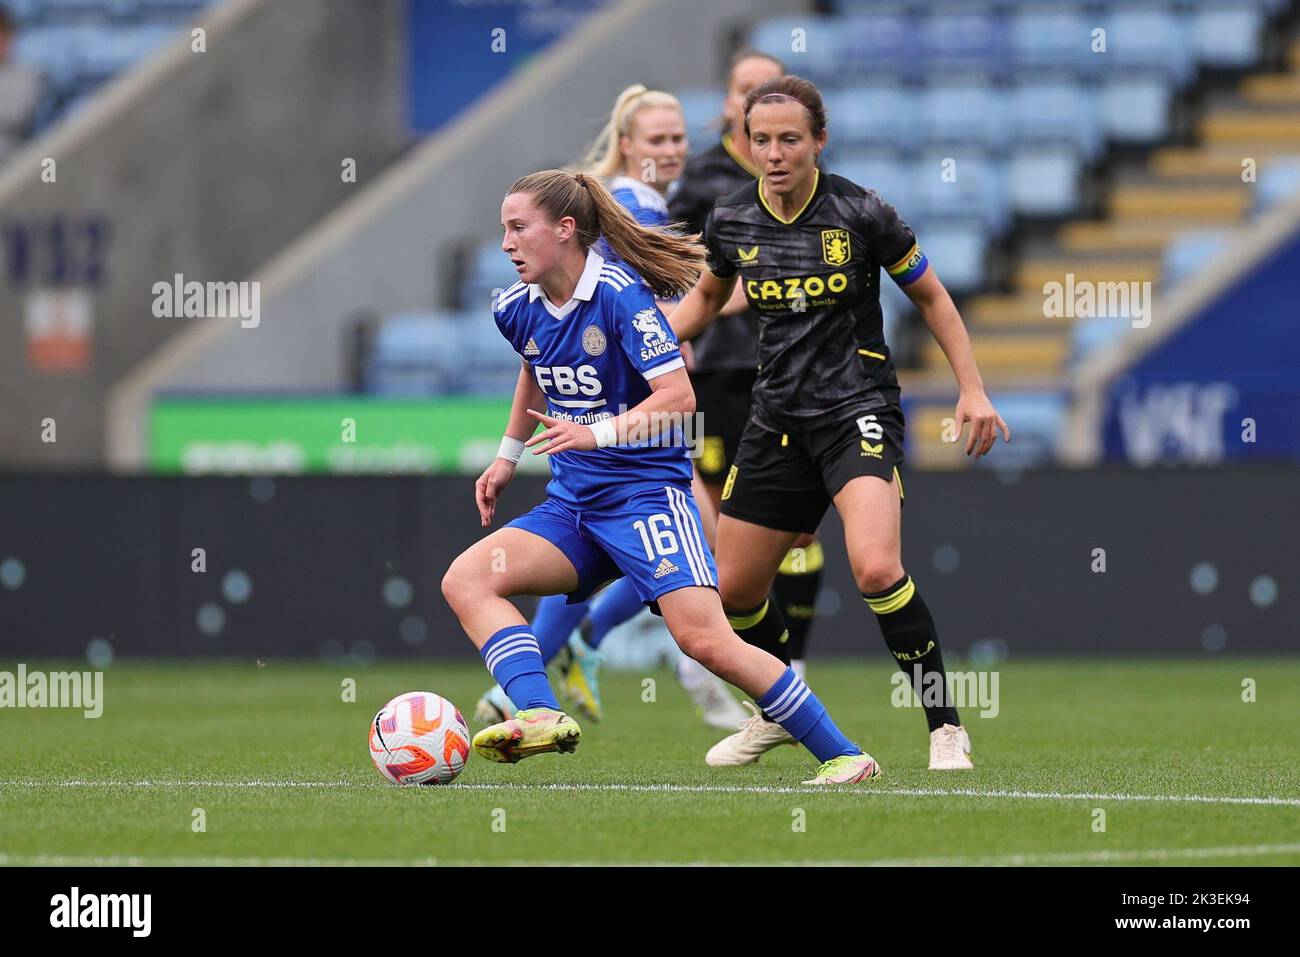 Leicester, UK. 25th Sep, 2022. Leicester, England, September 25th 2022: Carrie Jones (16 Leicester City) in action during the Barclays FA Womens Super League game between Leicester City and Aston Villa at the King Power Stadium in Leicester, England. (James Holyoak/SPP) Credit: SPP Sport Press Photo. /Alamy Live News Stock Photo